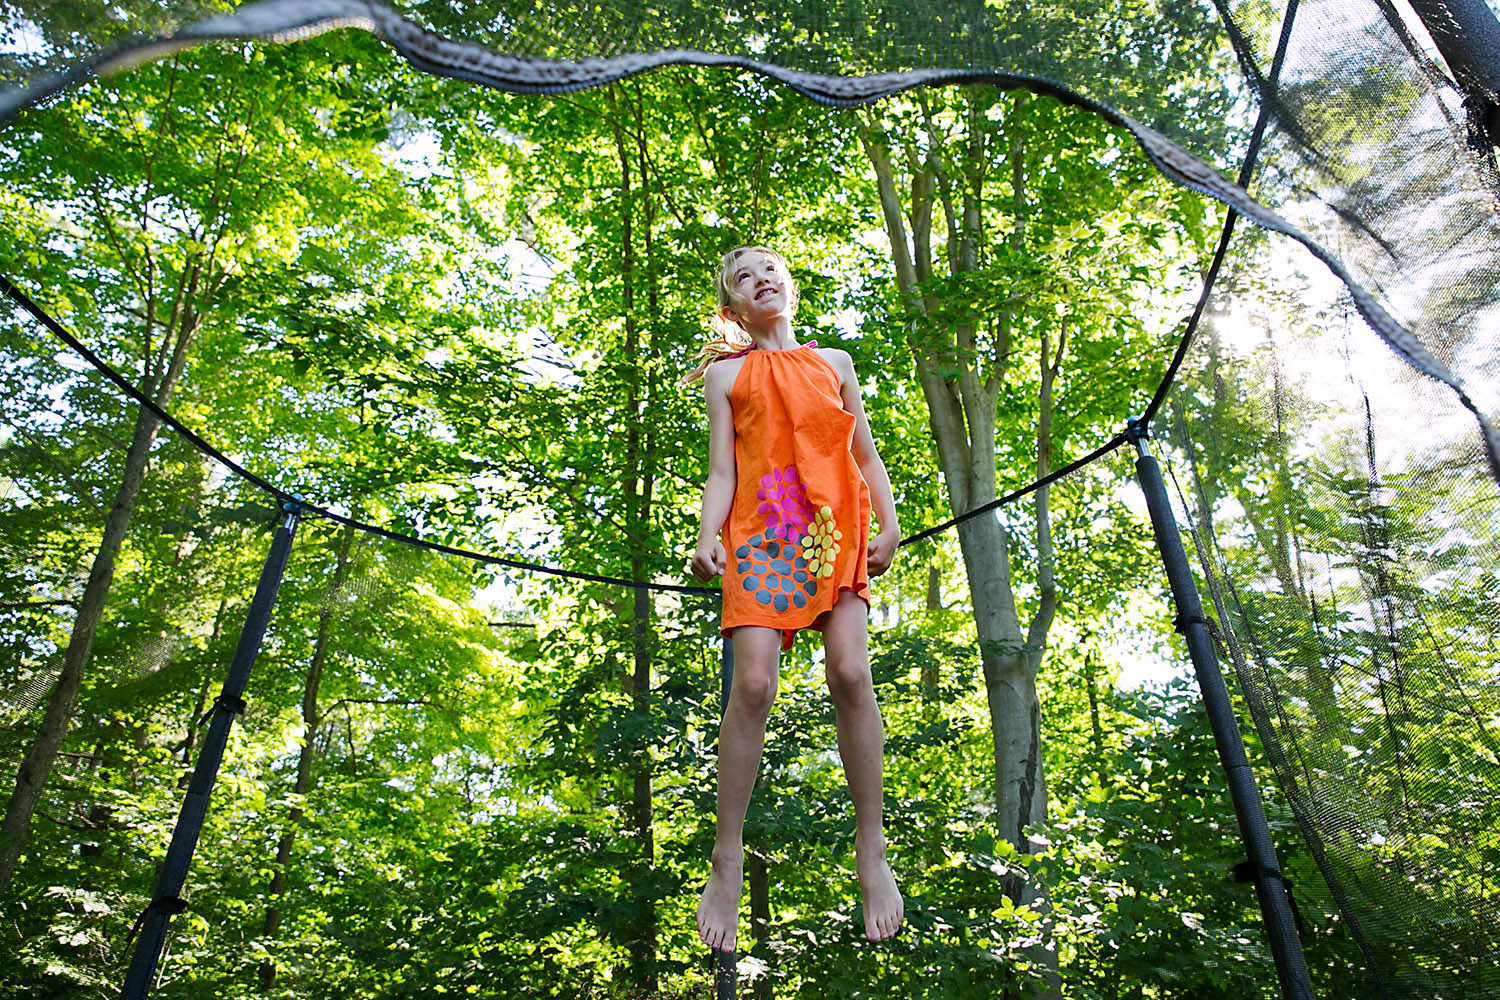 Girl jumping on a trampoline amongst the treest